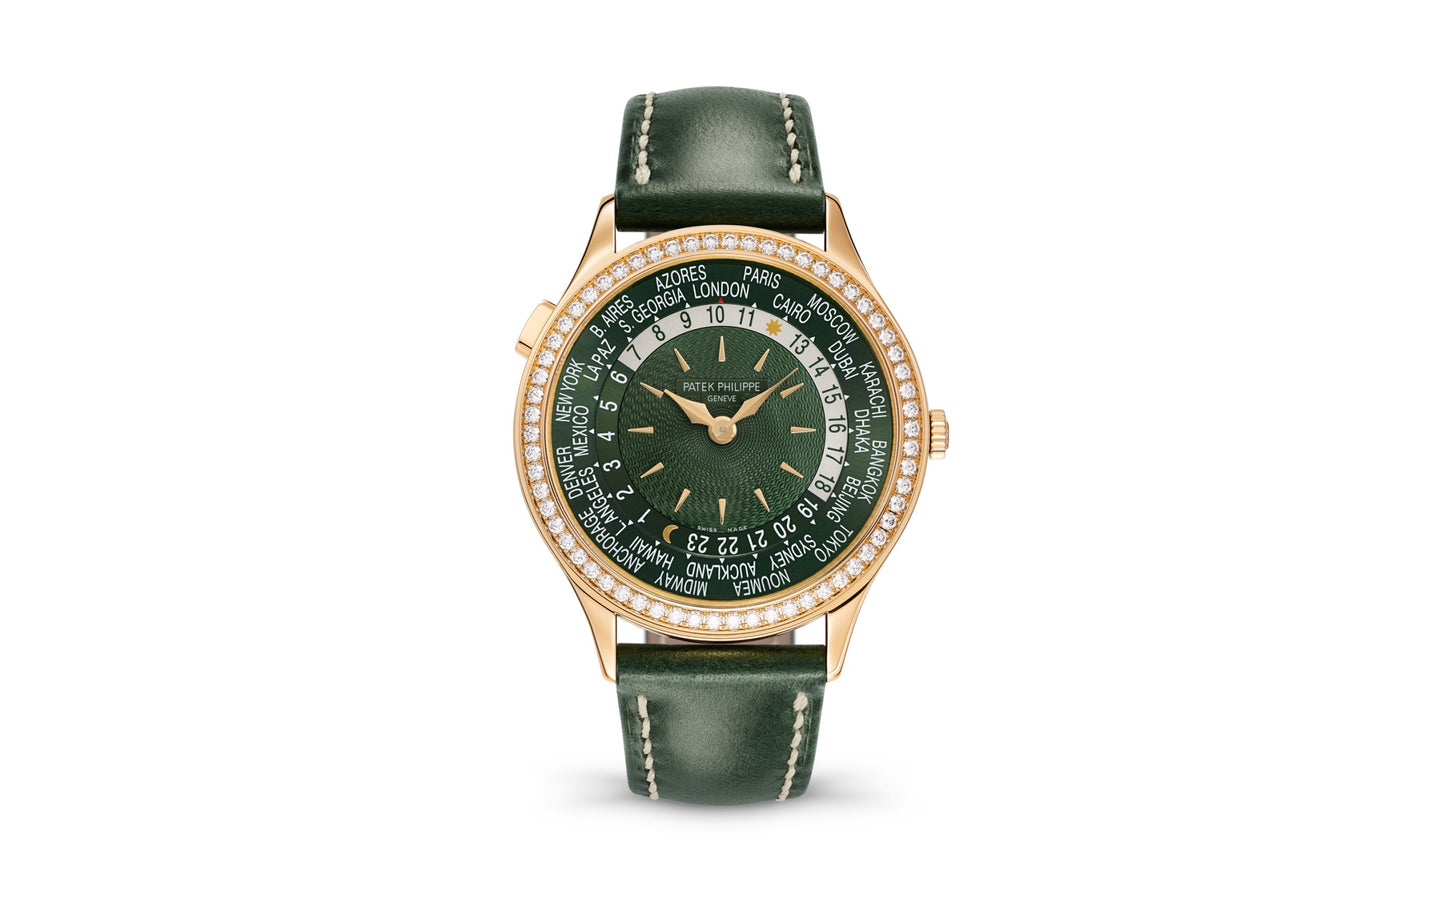 Patek Philippe Women’s Complication World-Time, 18k Rose Gold set with 89 diamonds (~1.03 ct.), 36mm, Ref# 7130R-014, 1